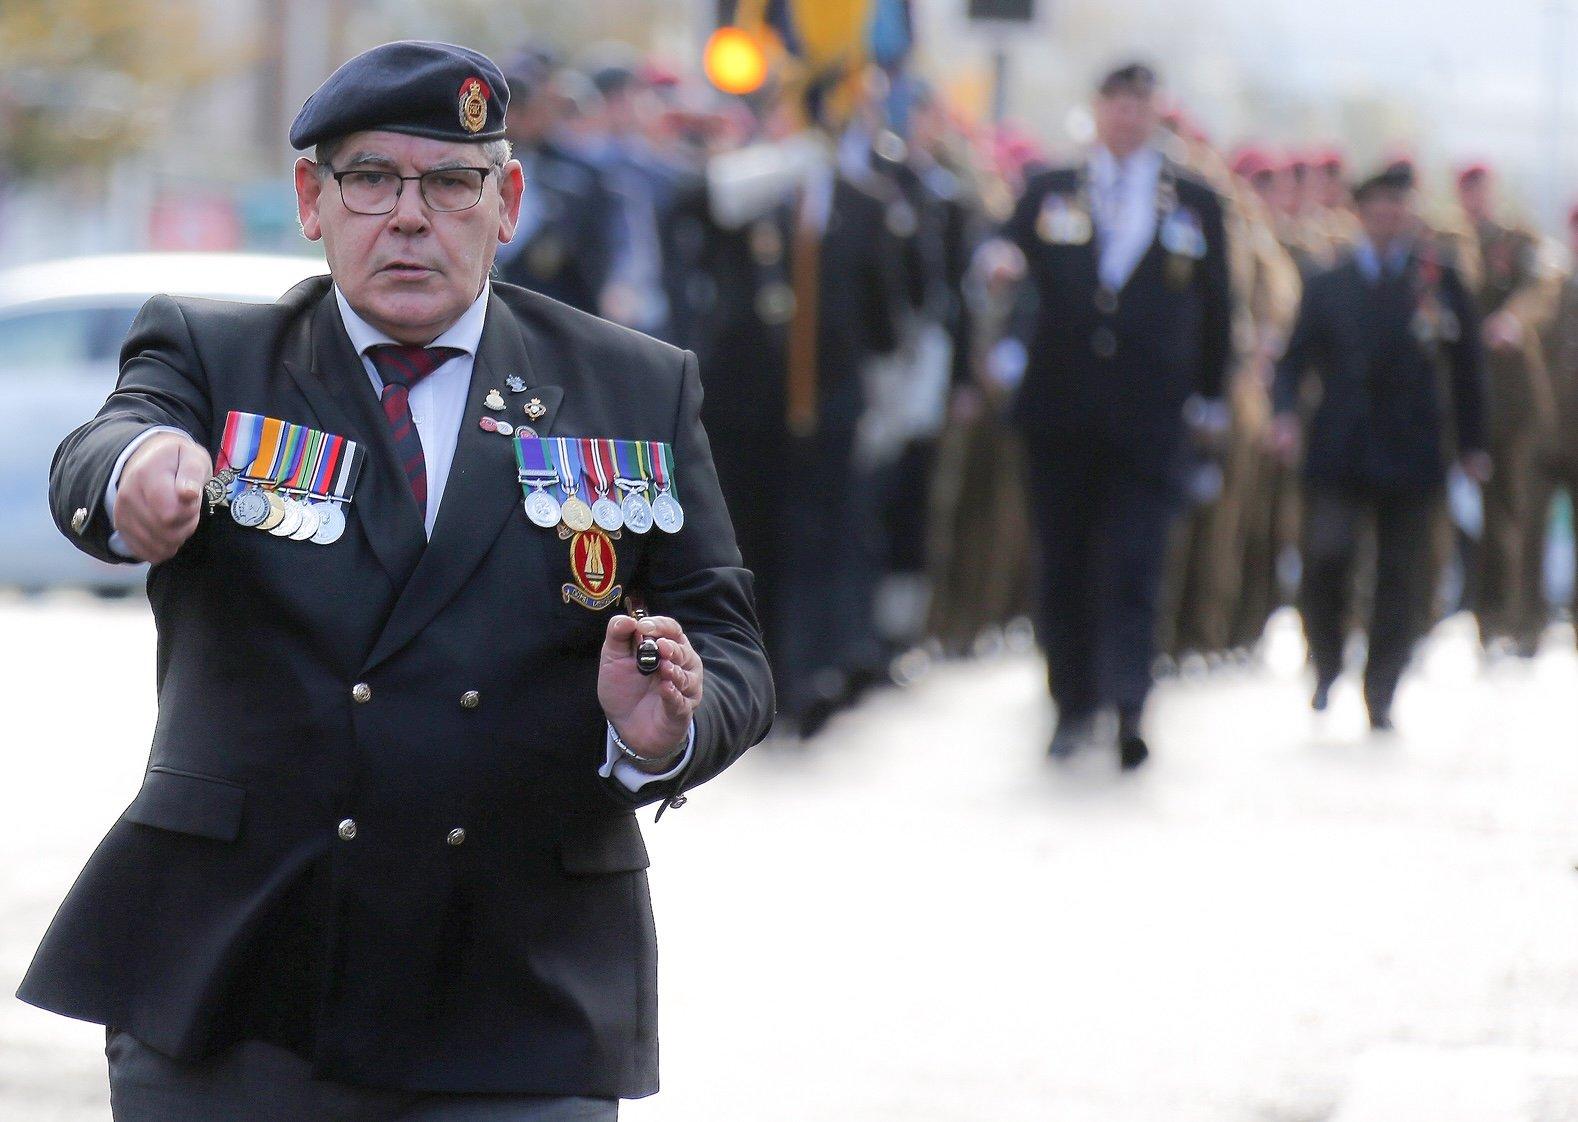 Remembrance Sunday in Worthing